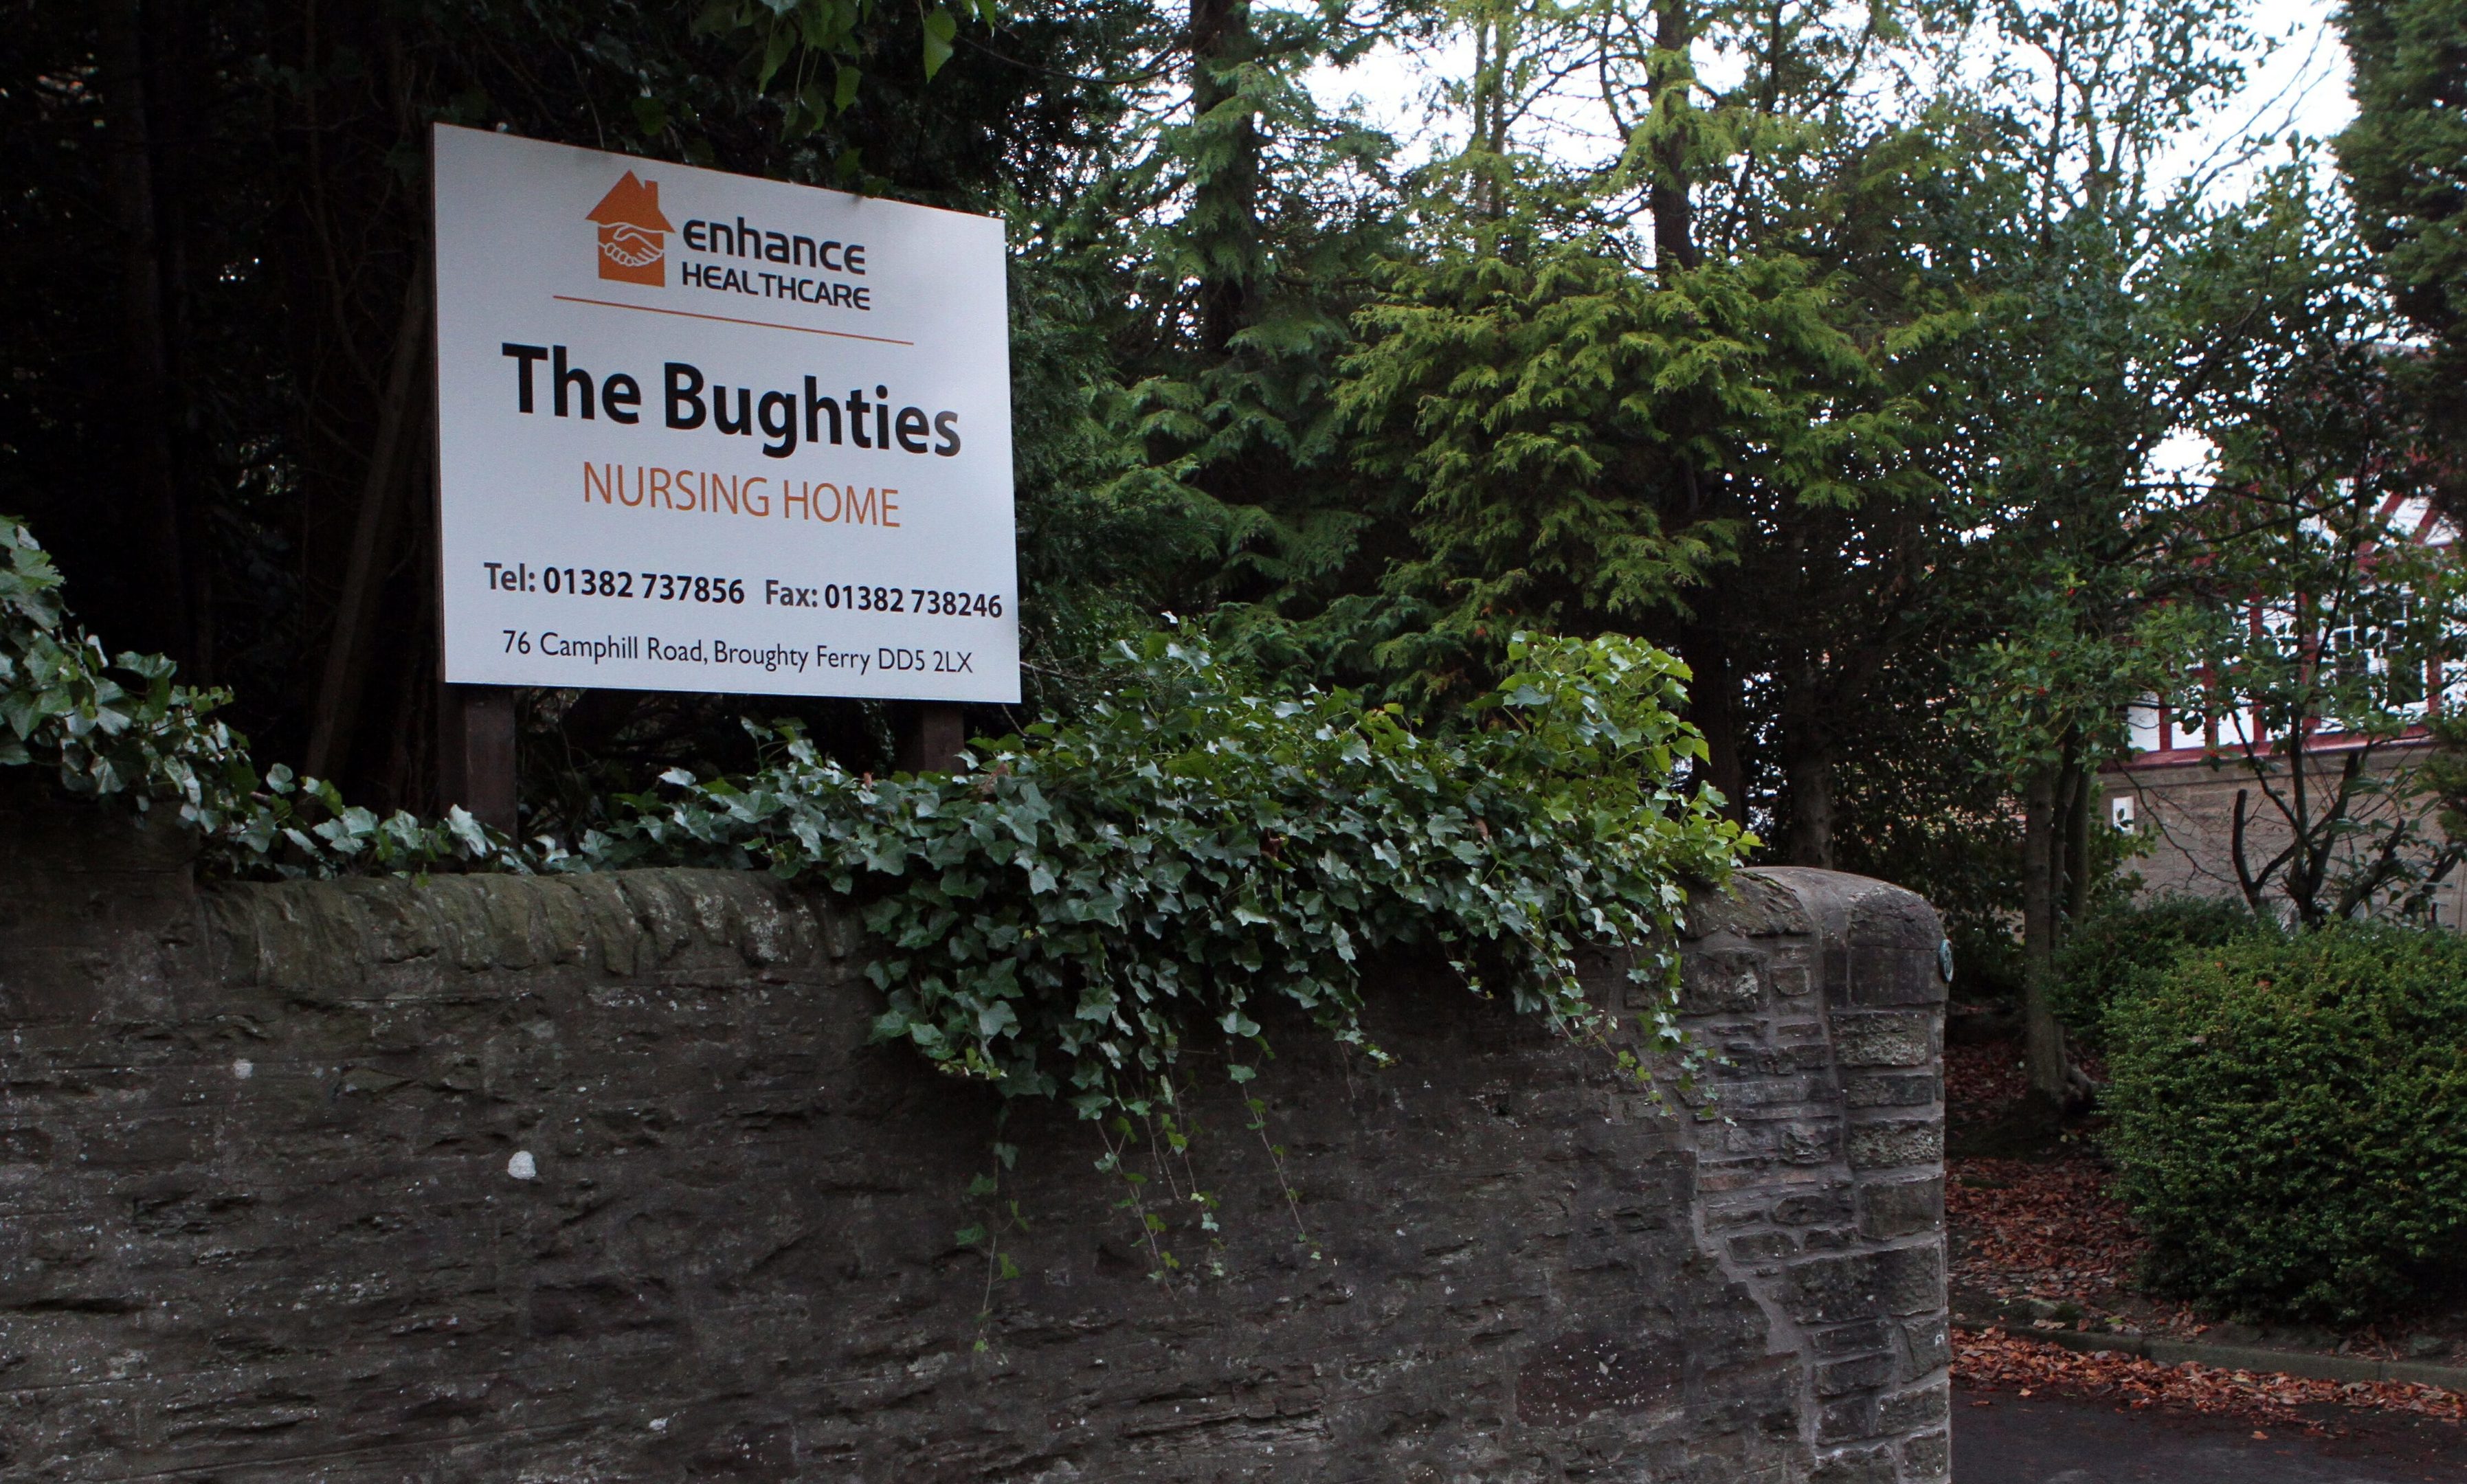 The Bughties Nursing Home, Broughty Ferry. Image: Gareth Jennings/DC Thomson